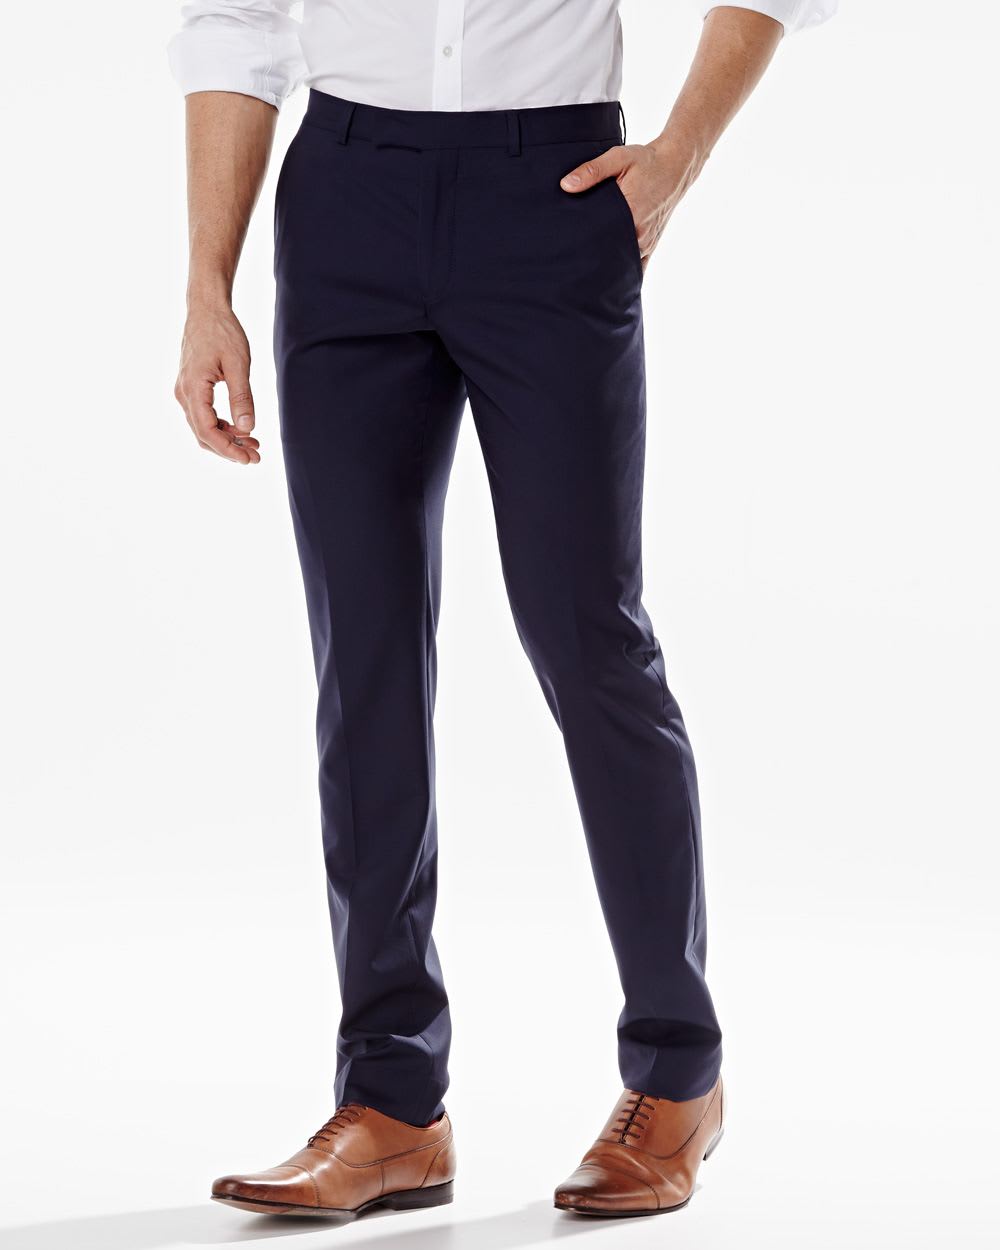 Solid navy wool pant by Ben Sherman (TM) | RW&CO.